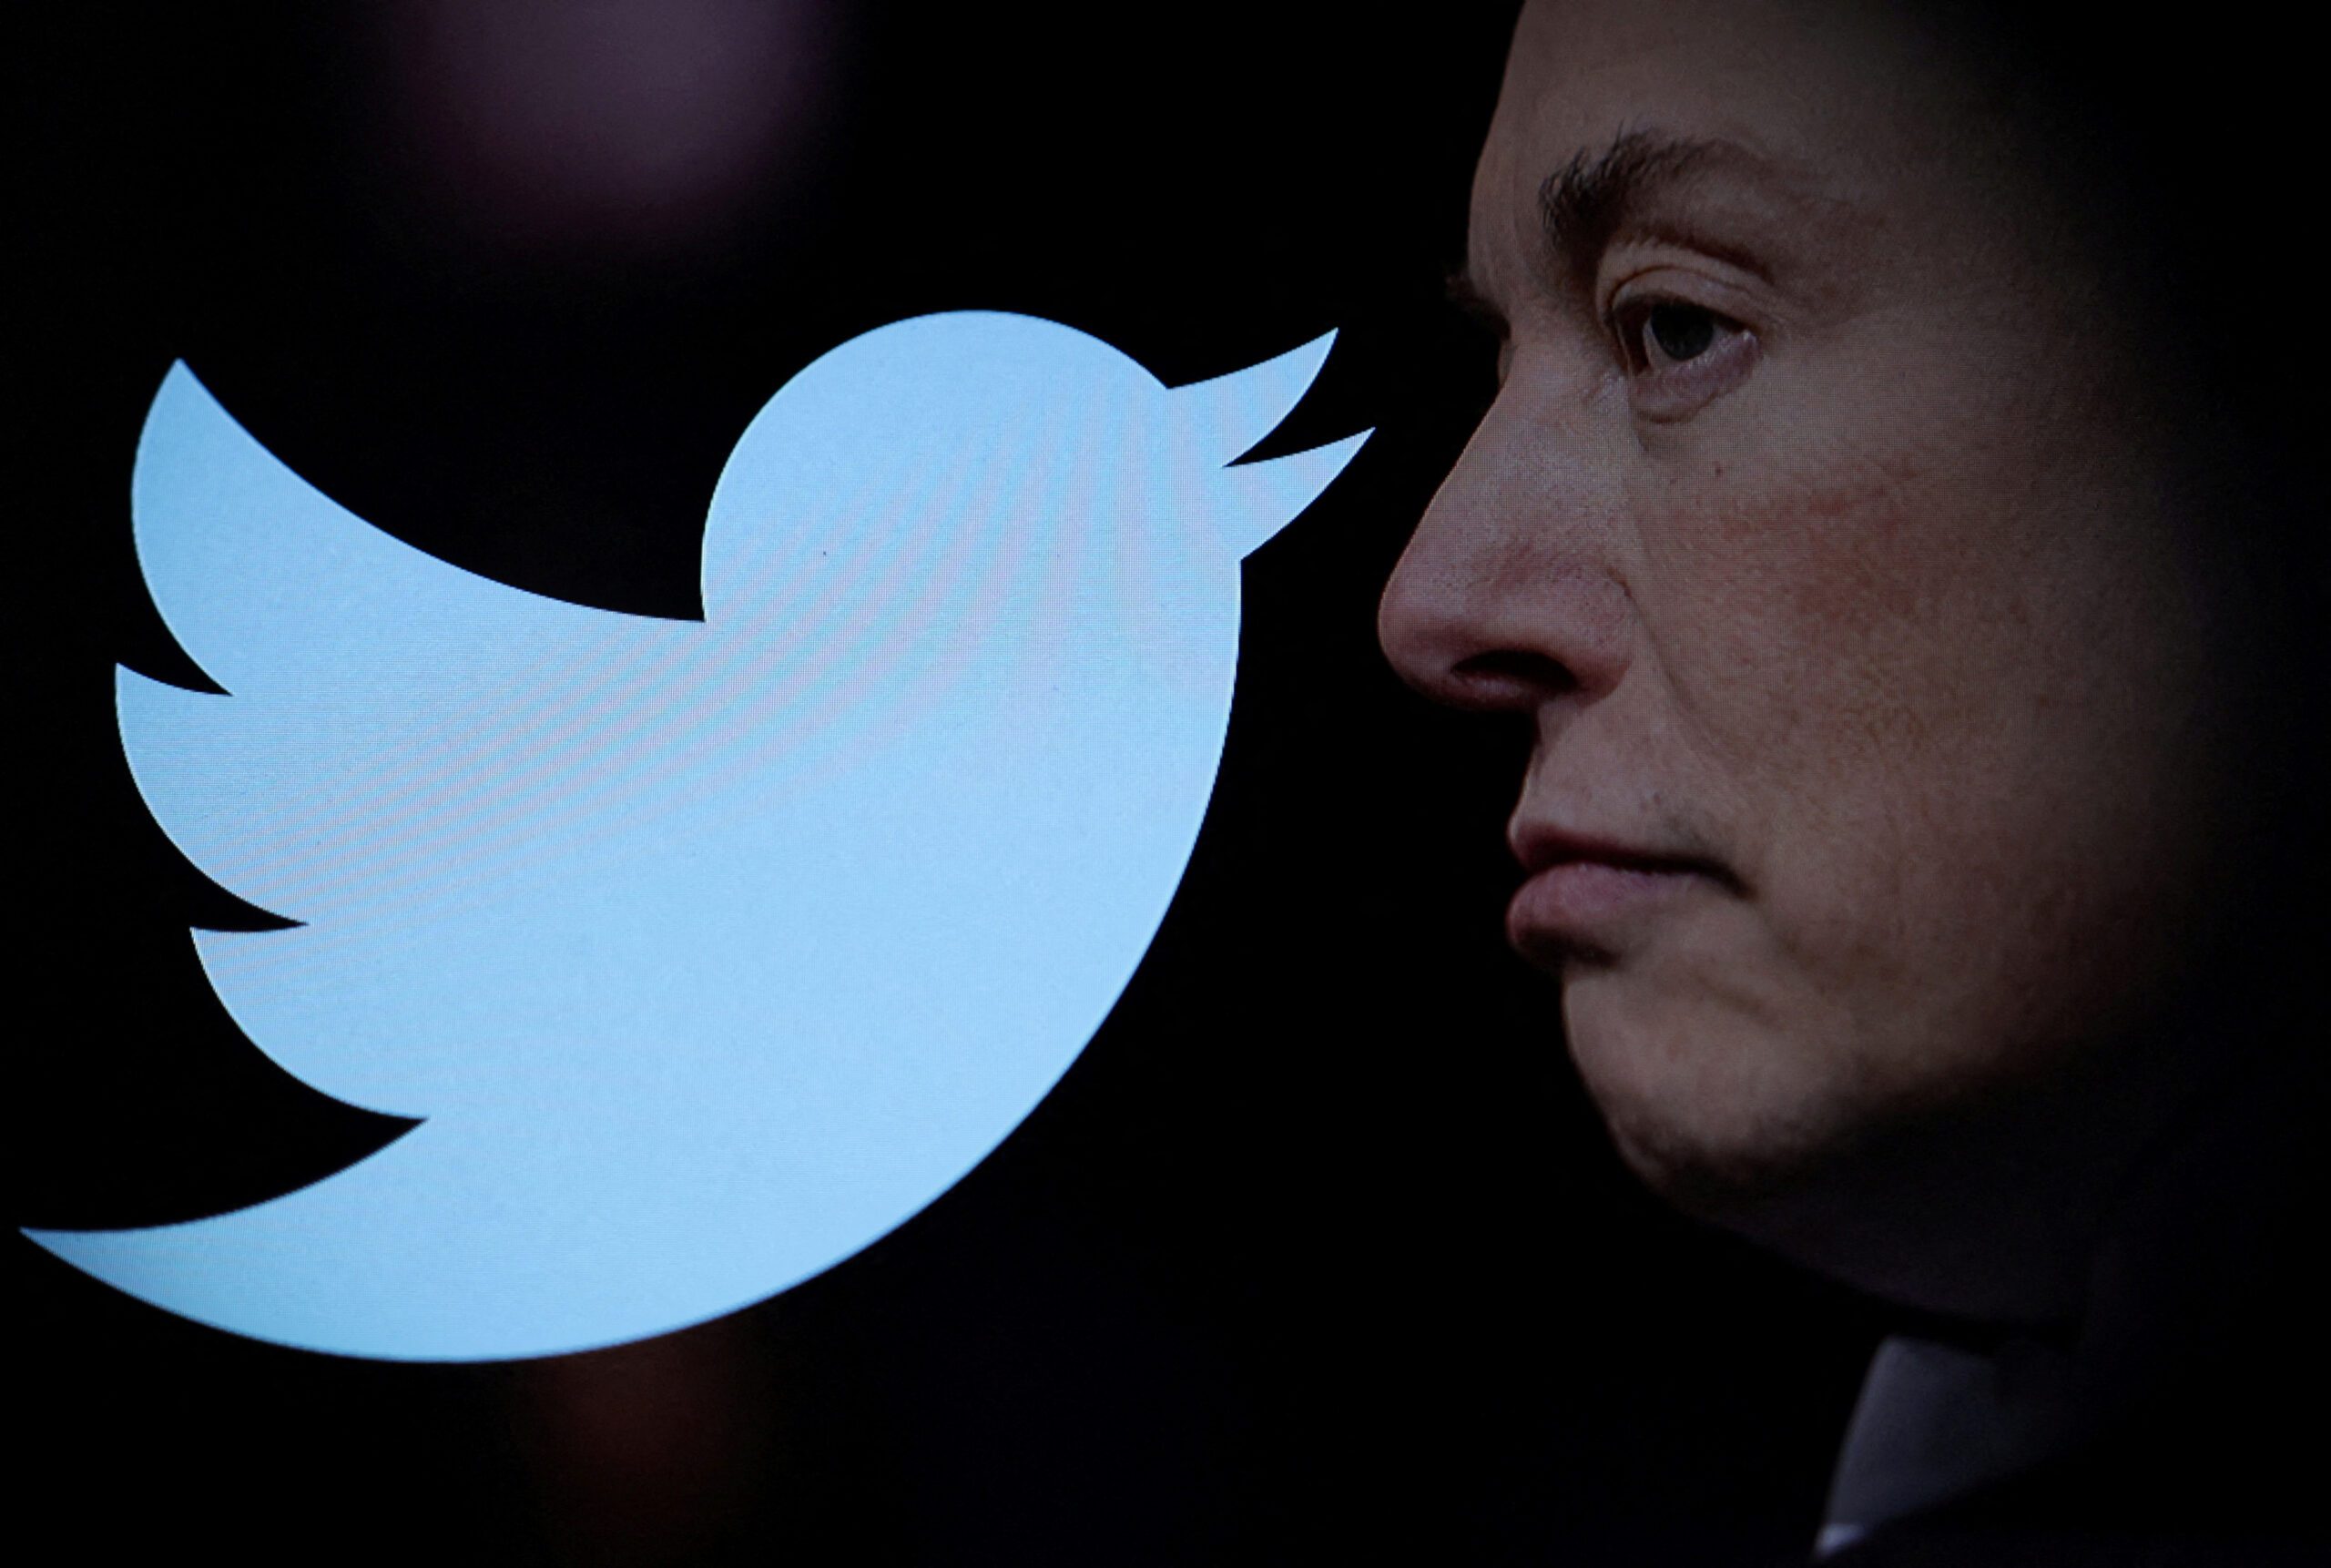 How Musk’s Twitter takeover could endanger vulnerable users